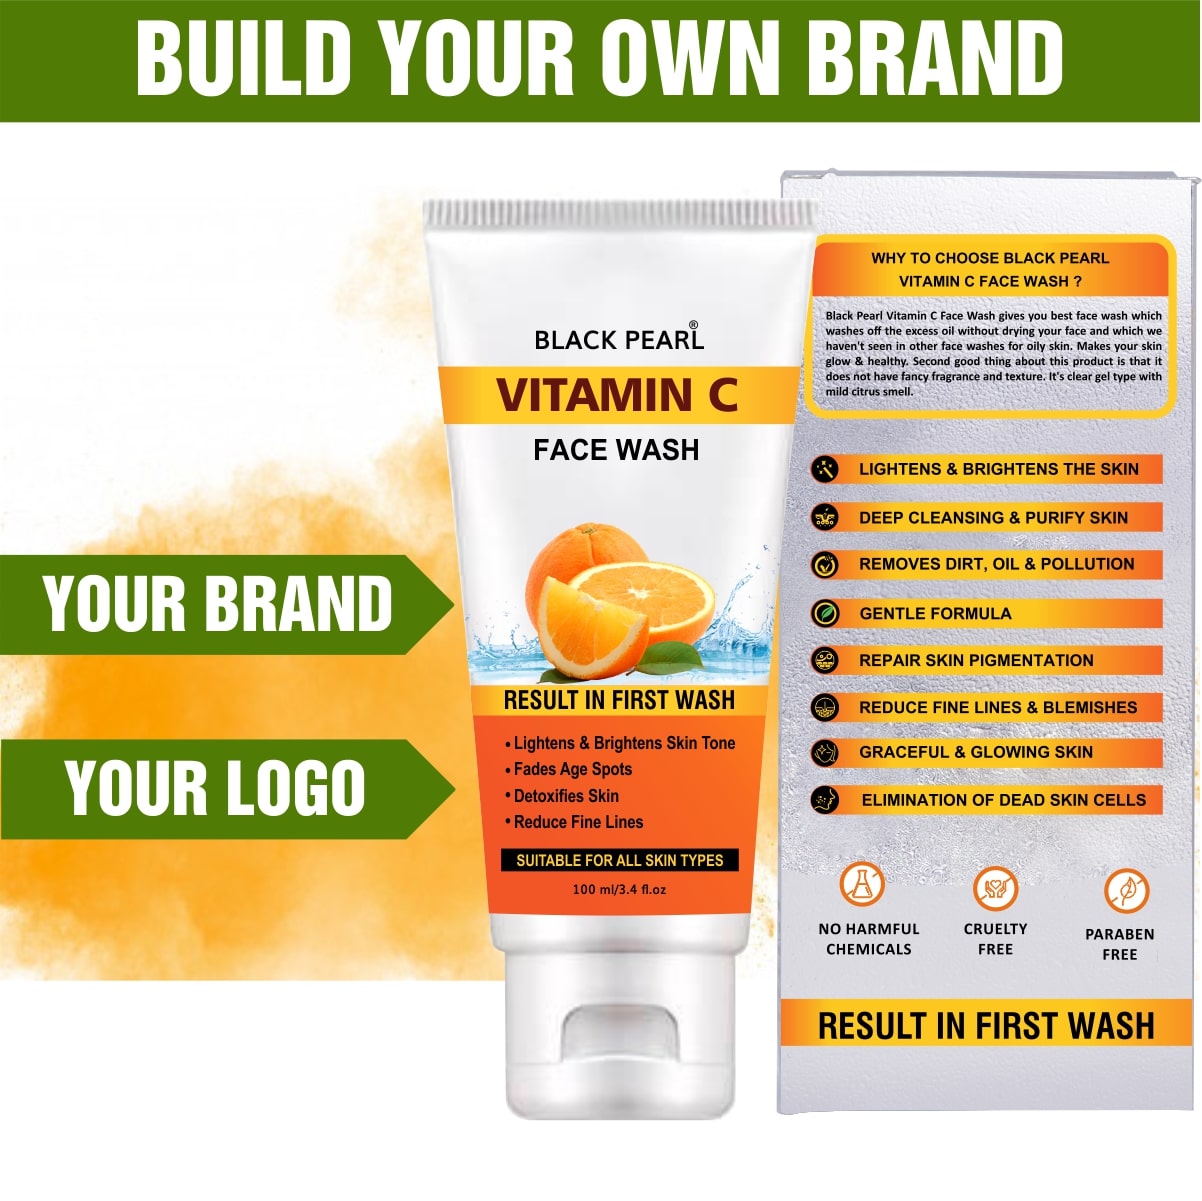 Vitamin C Face Wash Build Your Own Brand